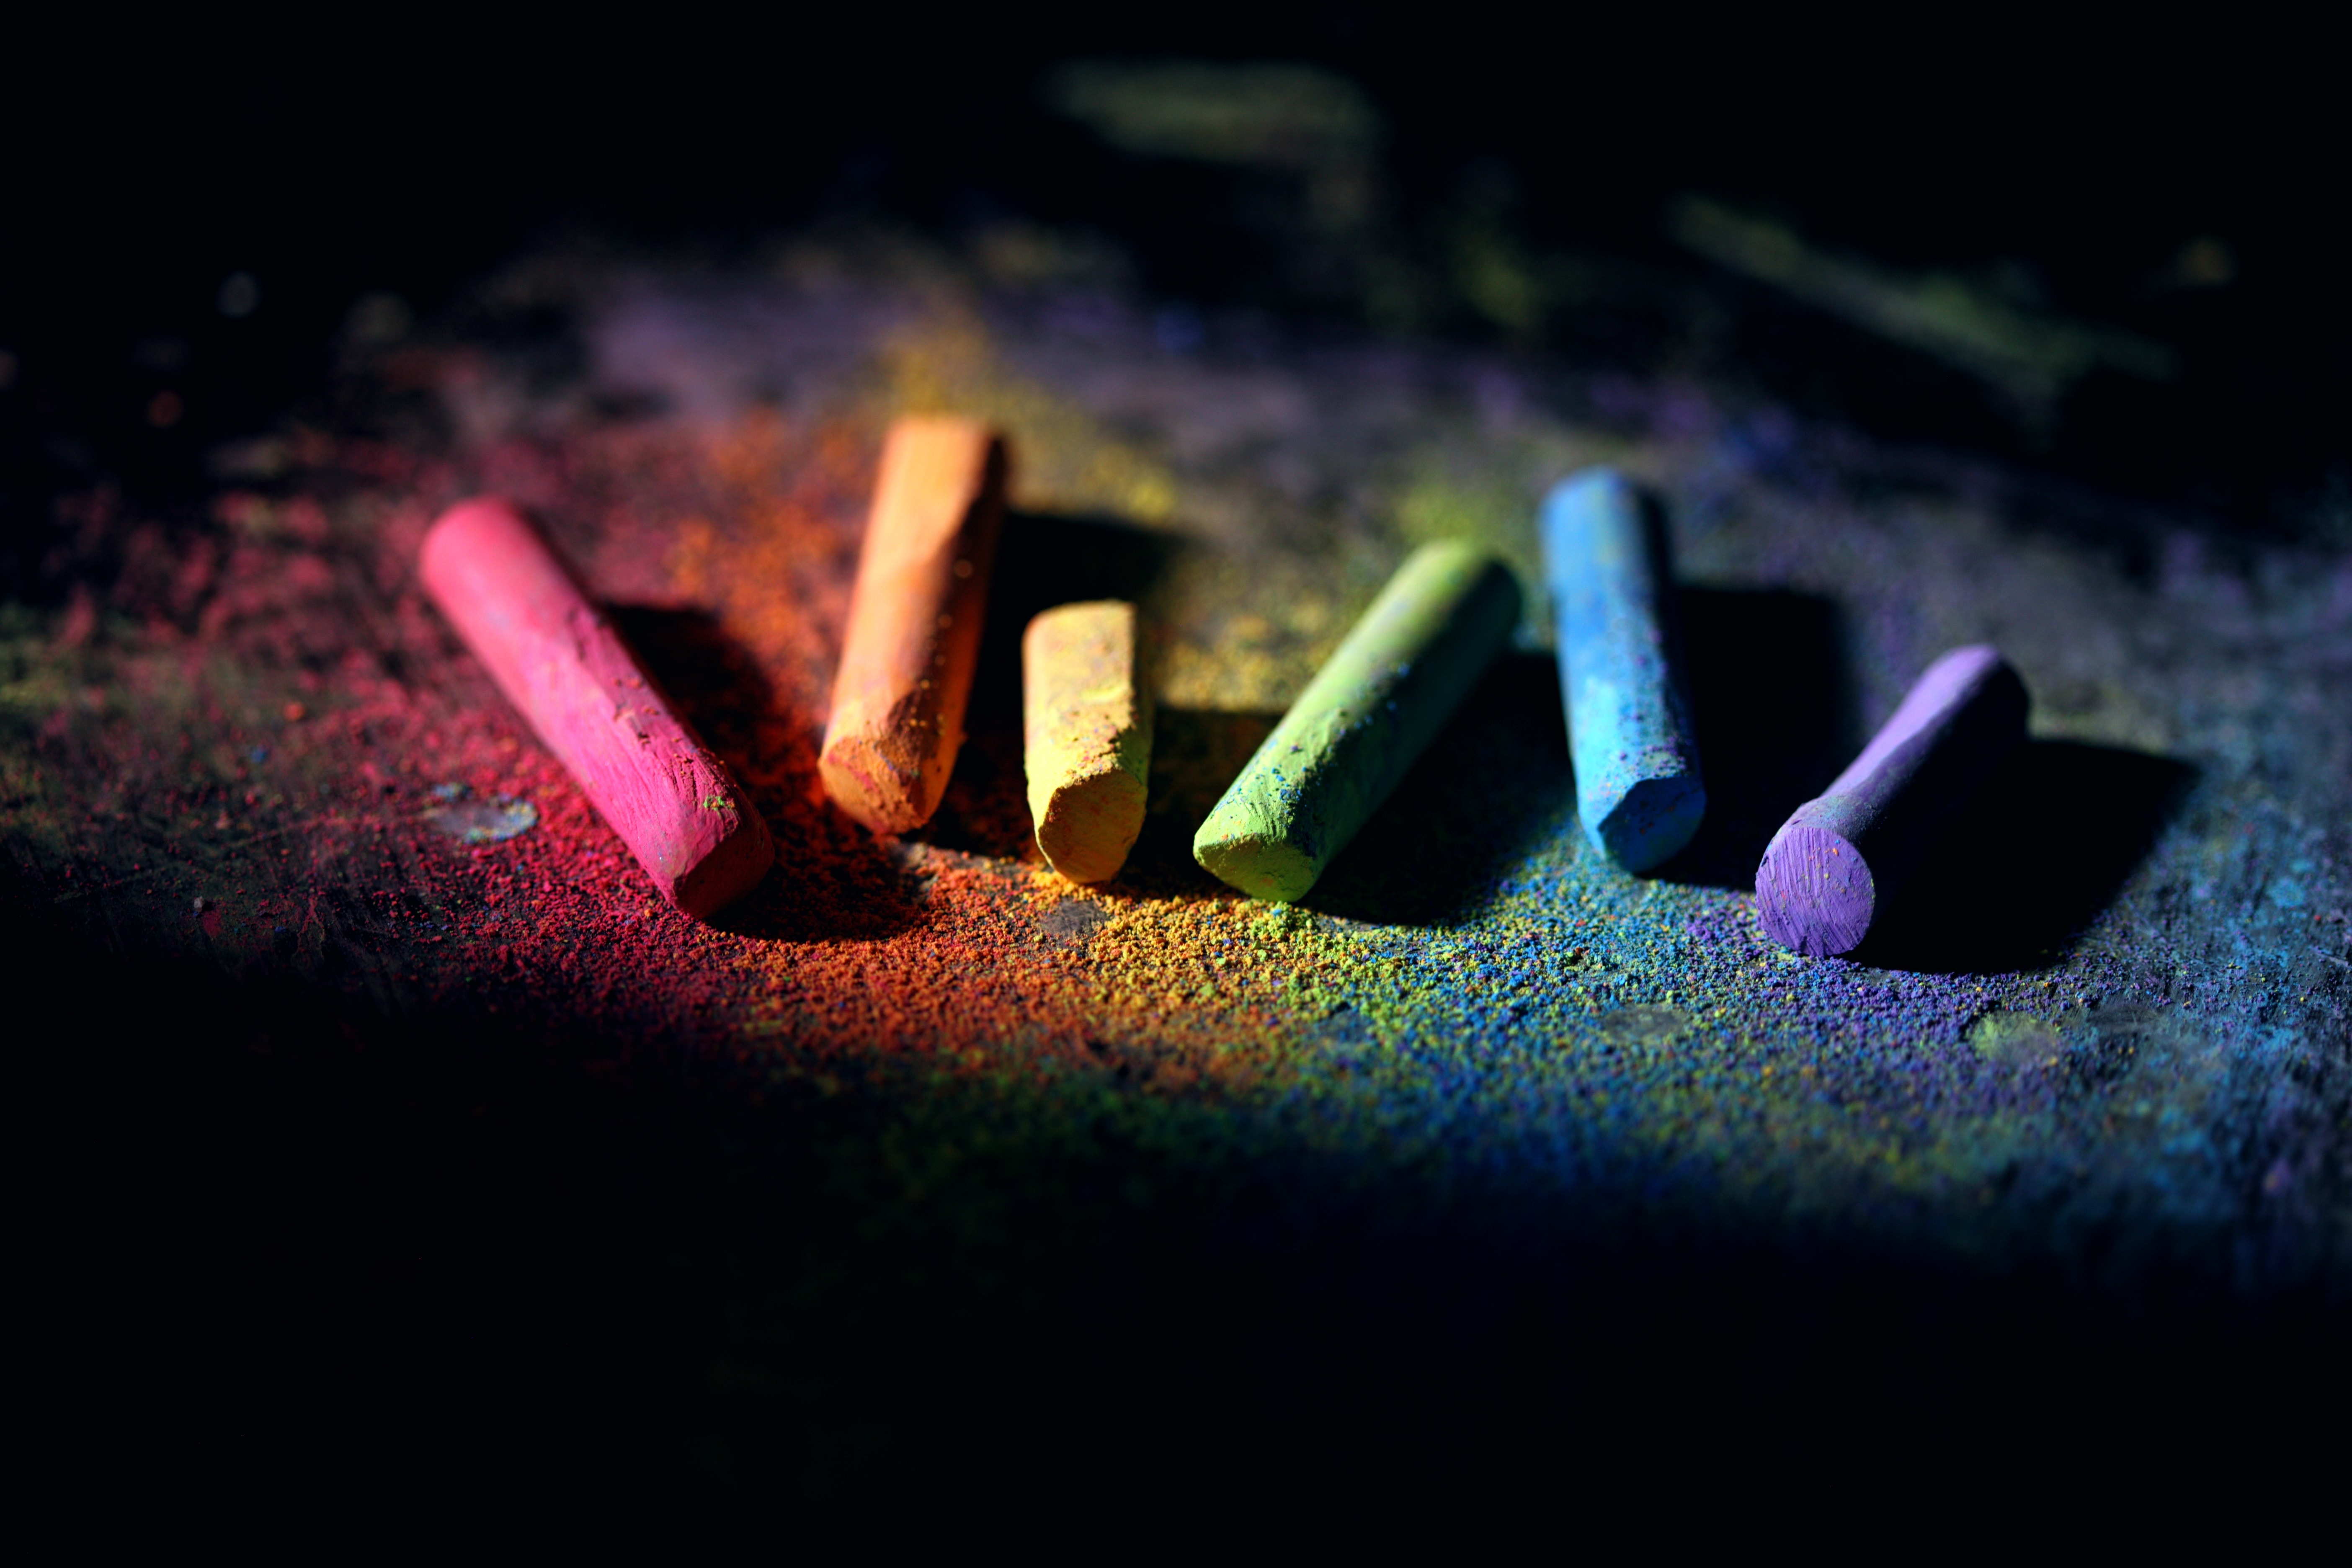 motley, multicolored, miscellanea, miscellaneous, paint, hobby, crayons lock screen backgrounds